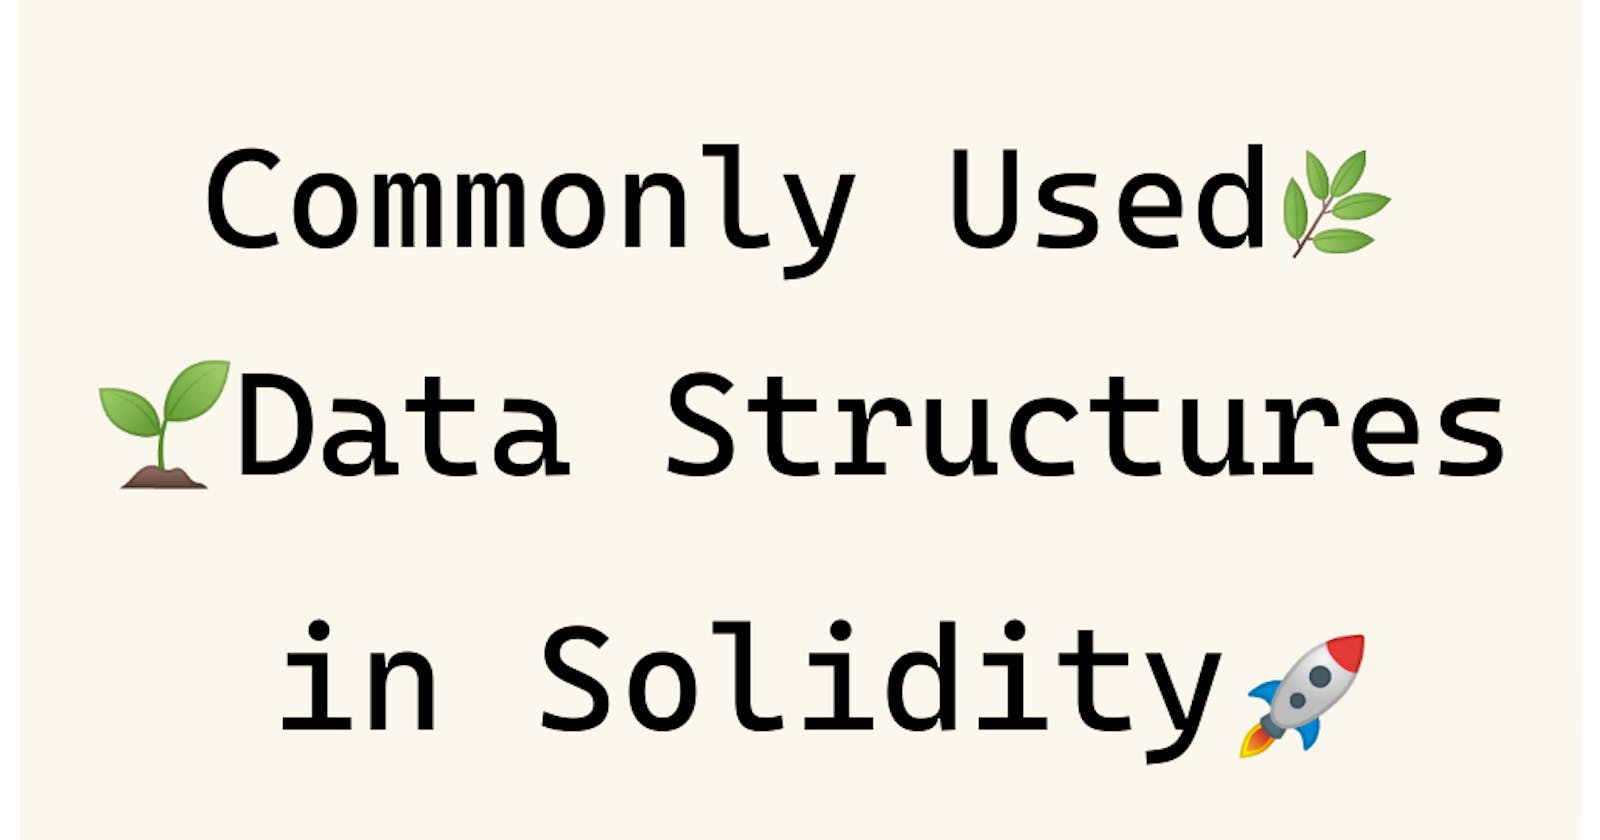 Commonly used Data Structures in Solidity